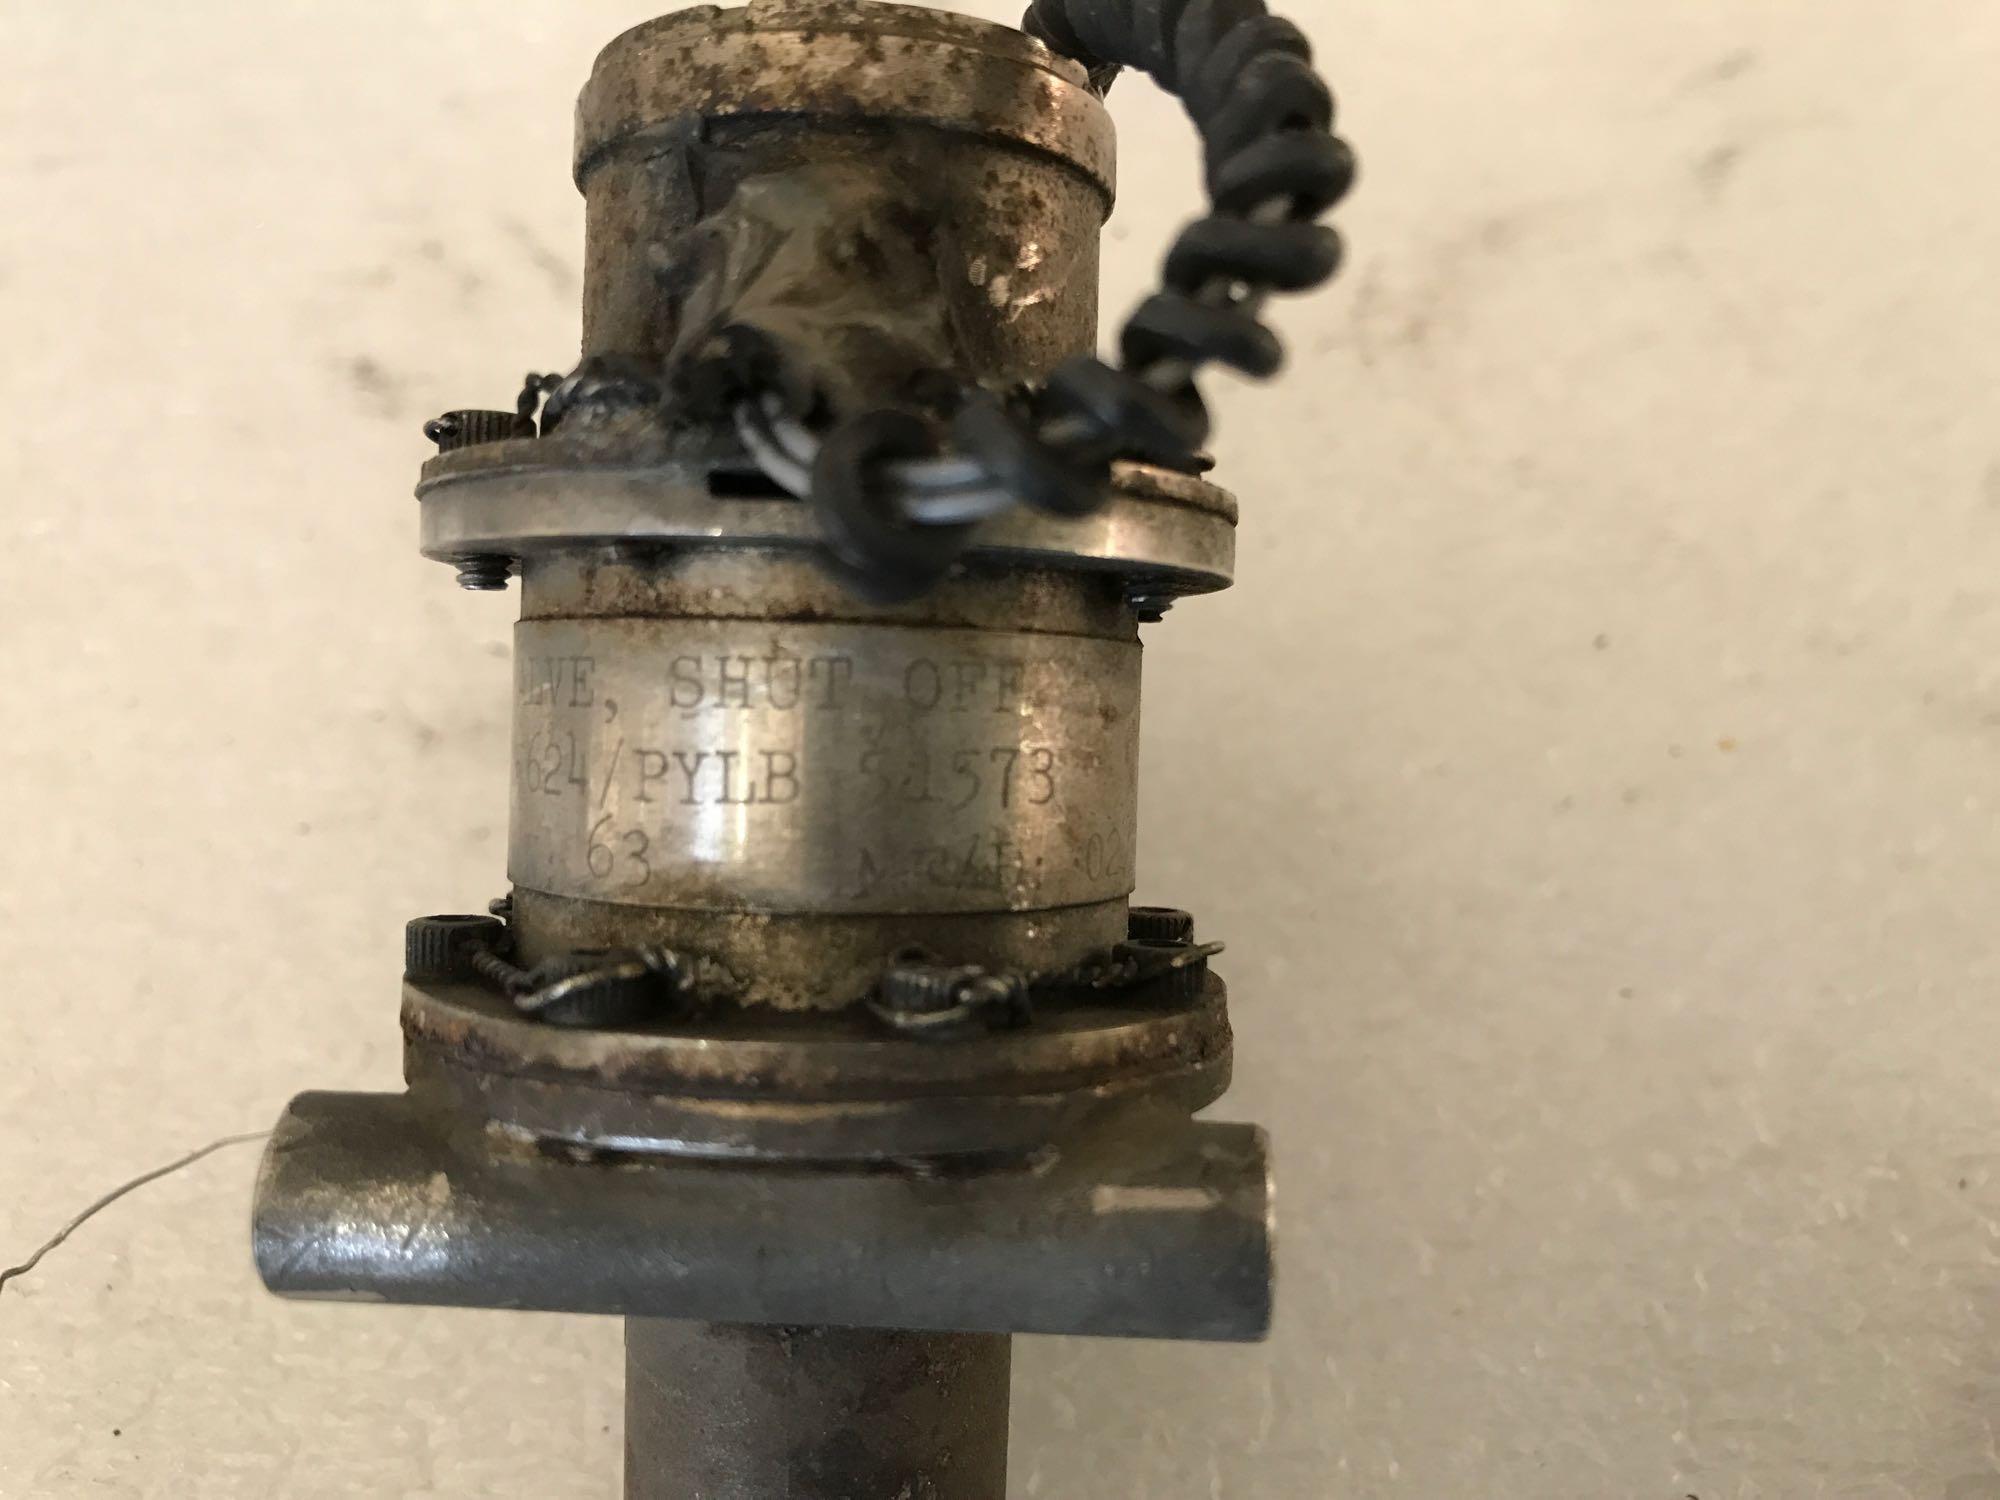 S76 ANTI-ICE VALVES PYLB 51573 (BOTH REPAIRABLE/REMOVED FROM TEAR DOWNS)